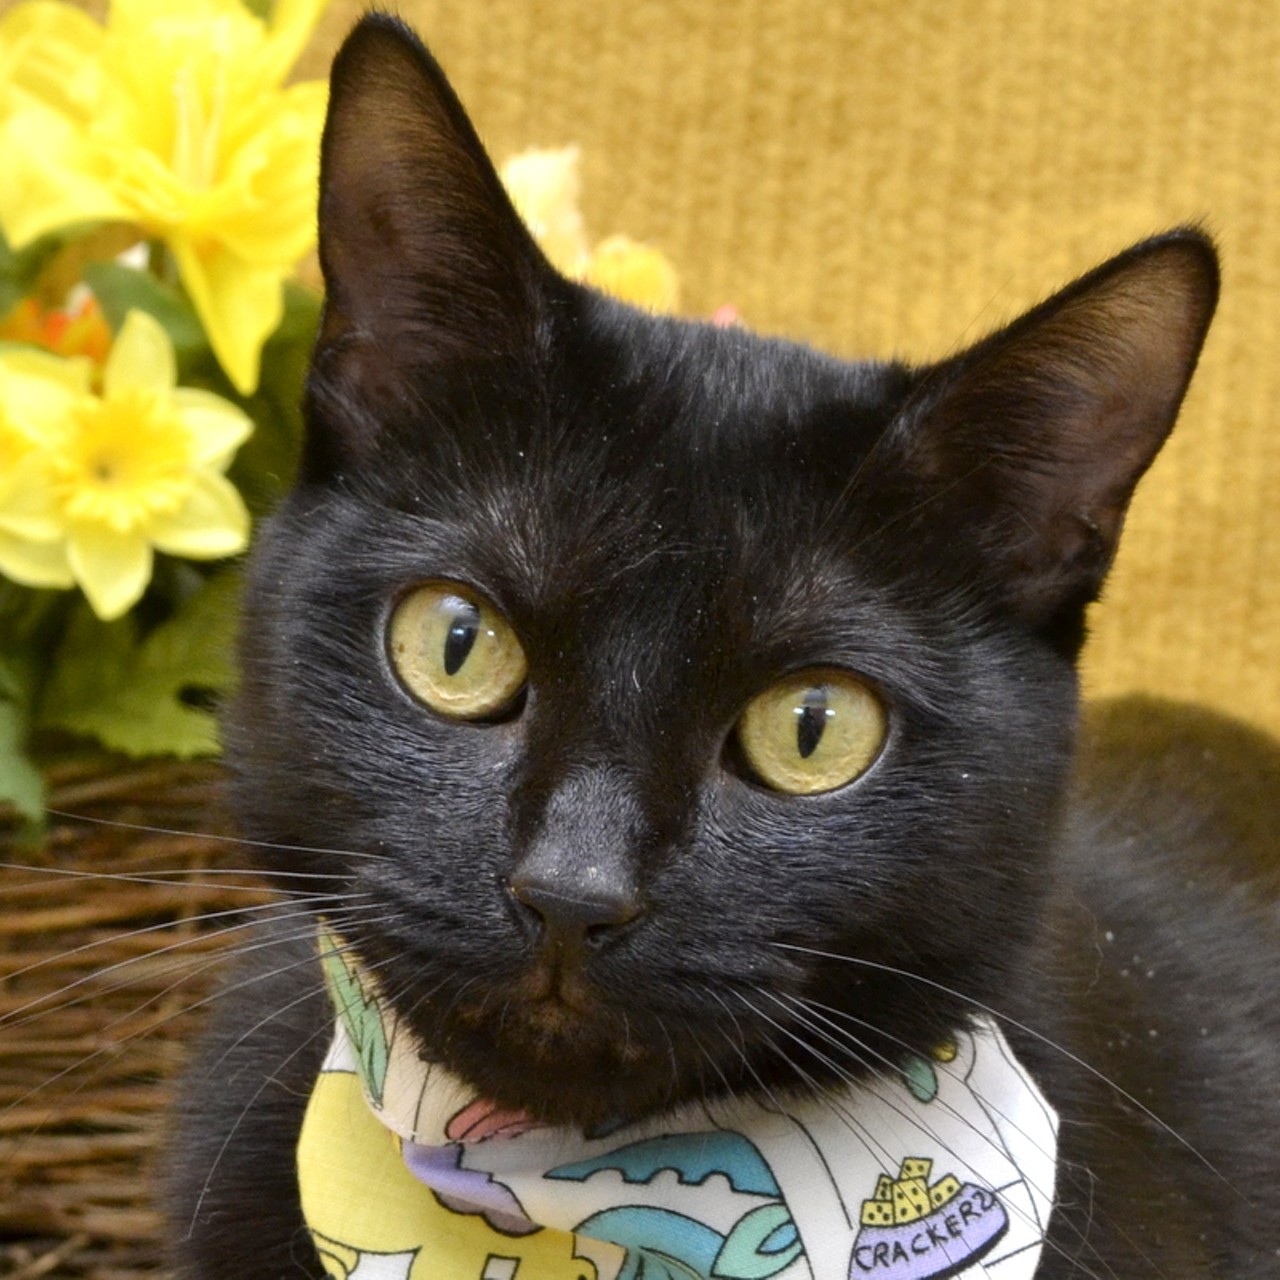 NAME:  Marnie
GENDER: Female
BREED: Domestic Short Hair
AGE: 2 years
WEIGHT: 7 pounds
SPECIAL CONSIDERATIONS: May prefer a home with older or no children
REASON I CAME TO MHS: Homeless in Westland
LOCATION: Berman Center for Animal Care in Westland
ID NUMBER: 867679